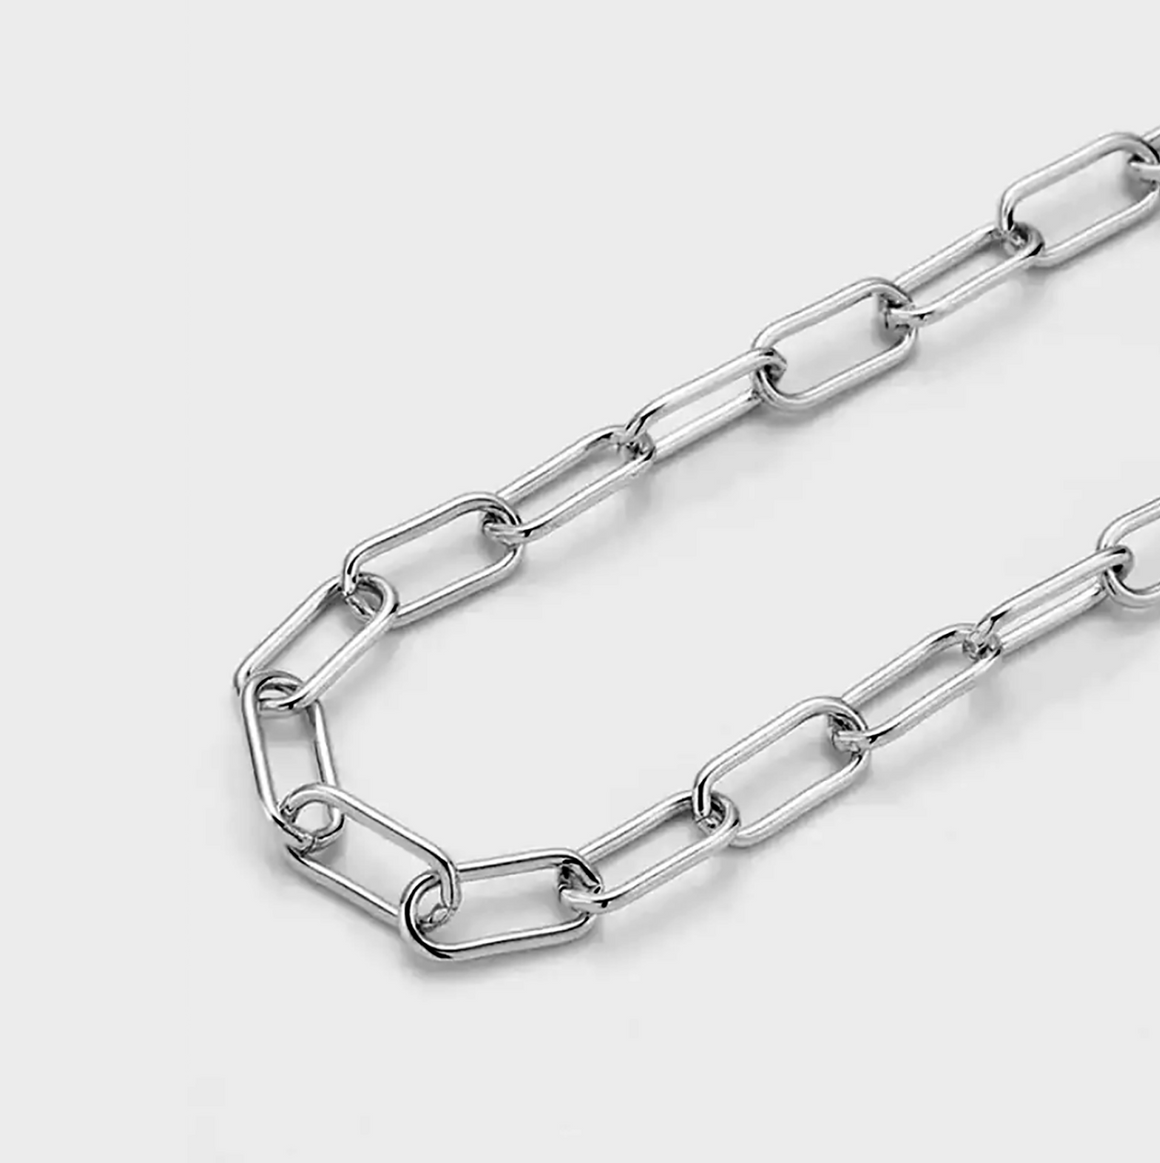 54 FLORAL 20mm OVAL JEAN CHAIN - SILVER